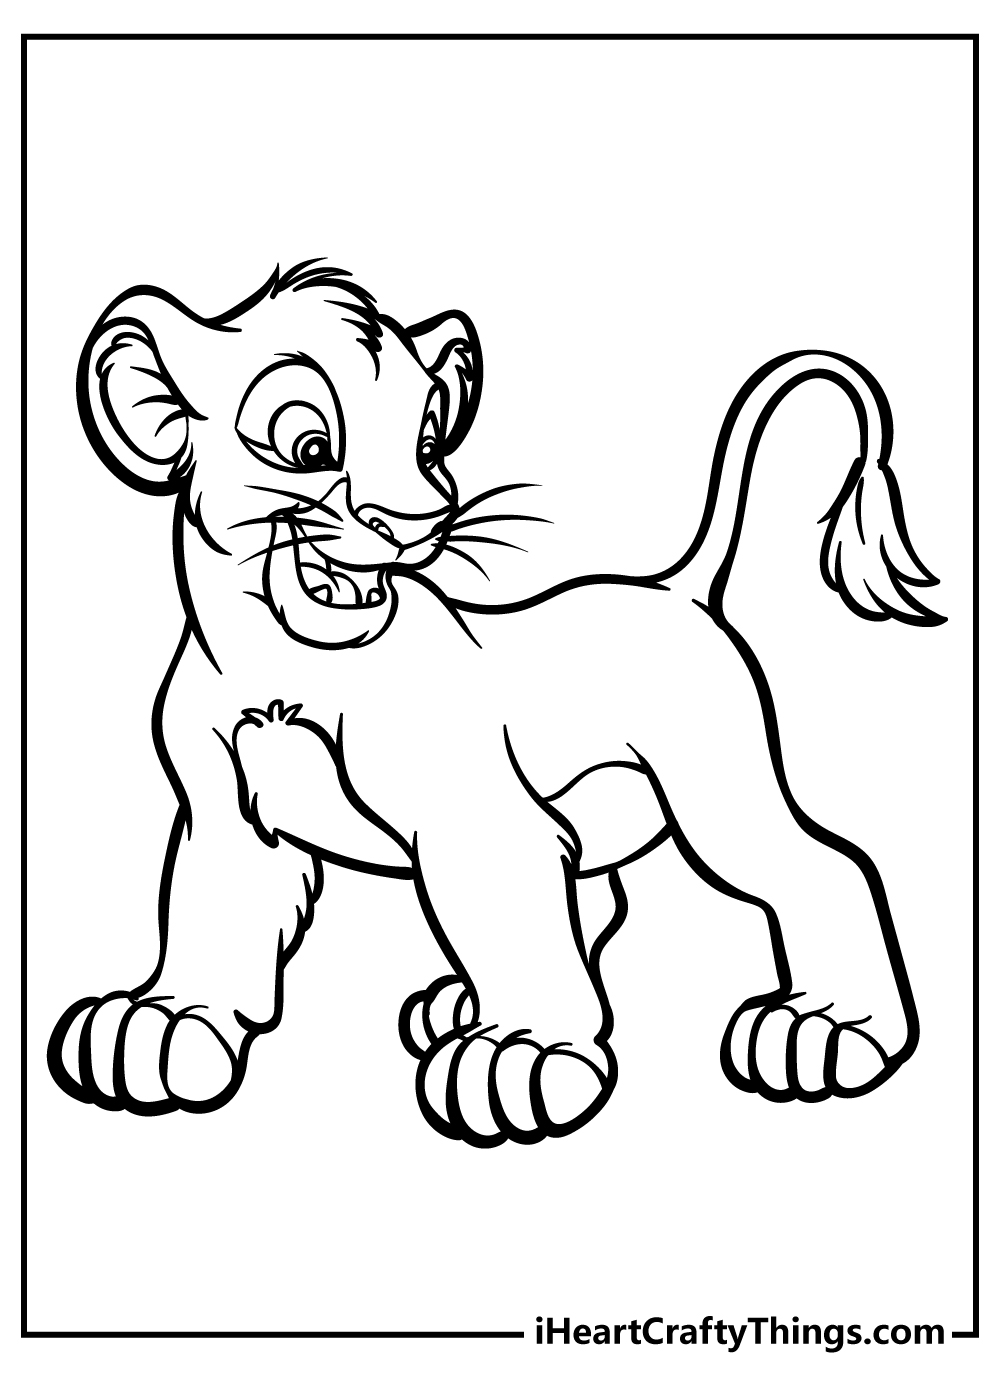 Lion King Coloring Pages for adults free printable